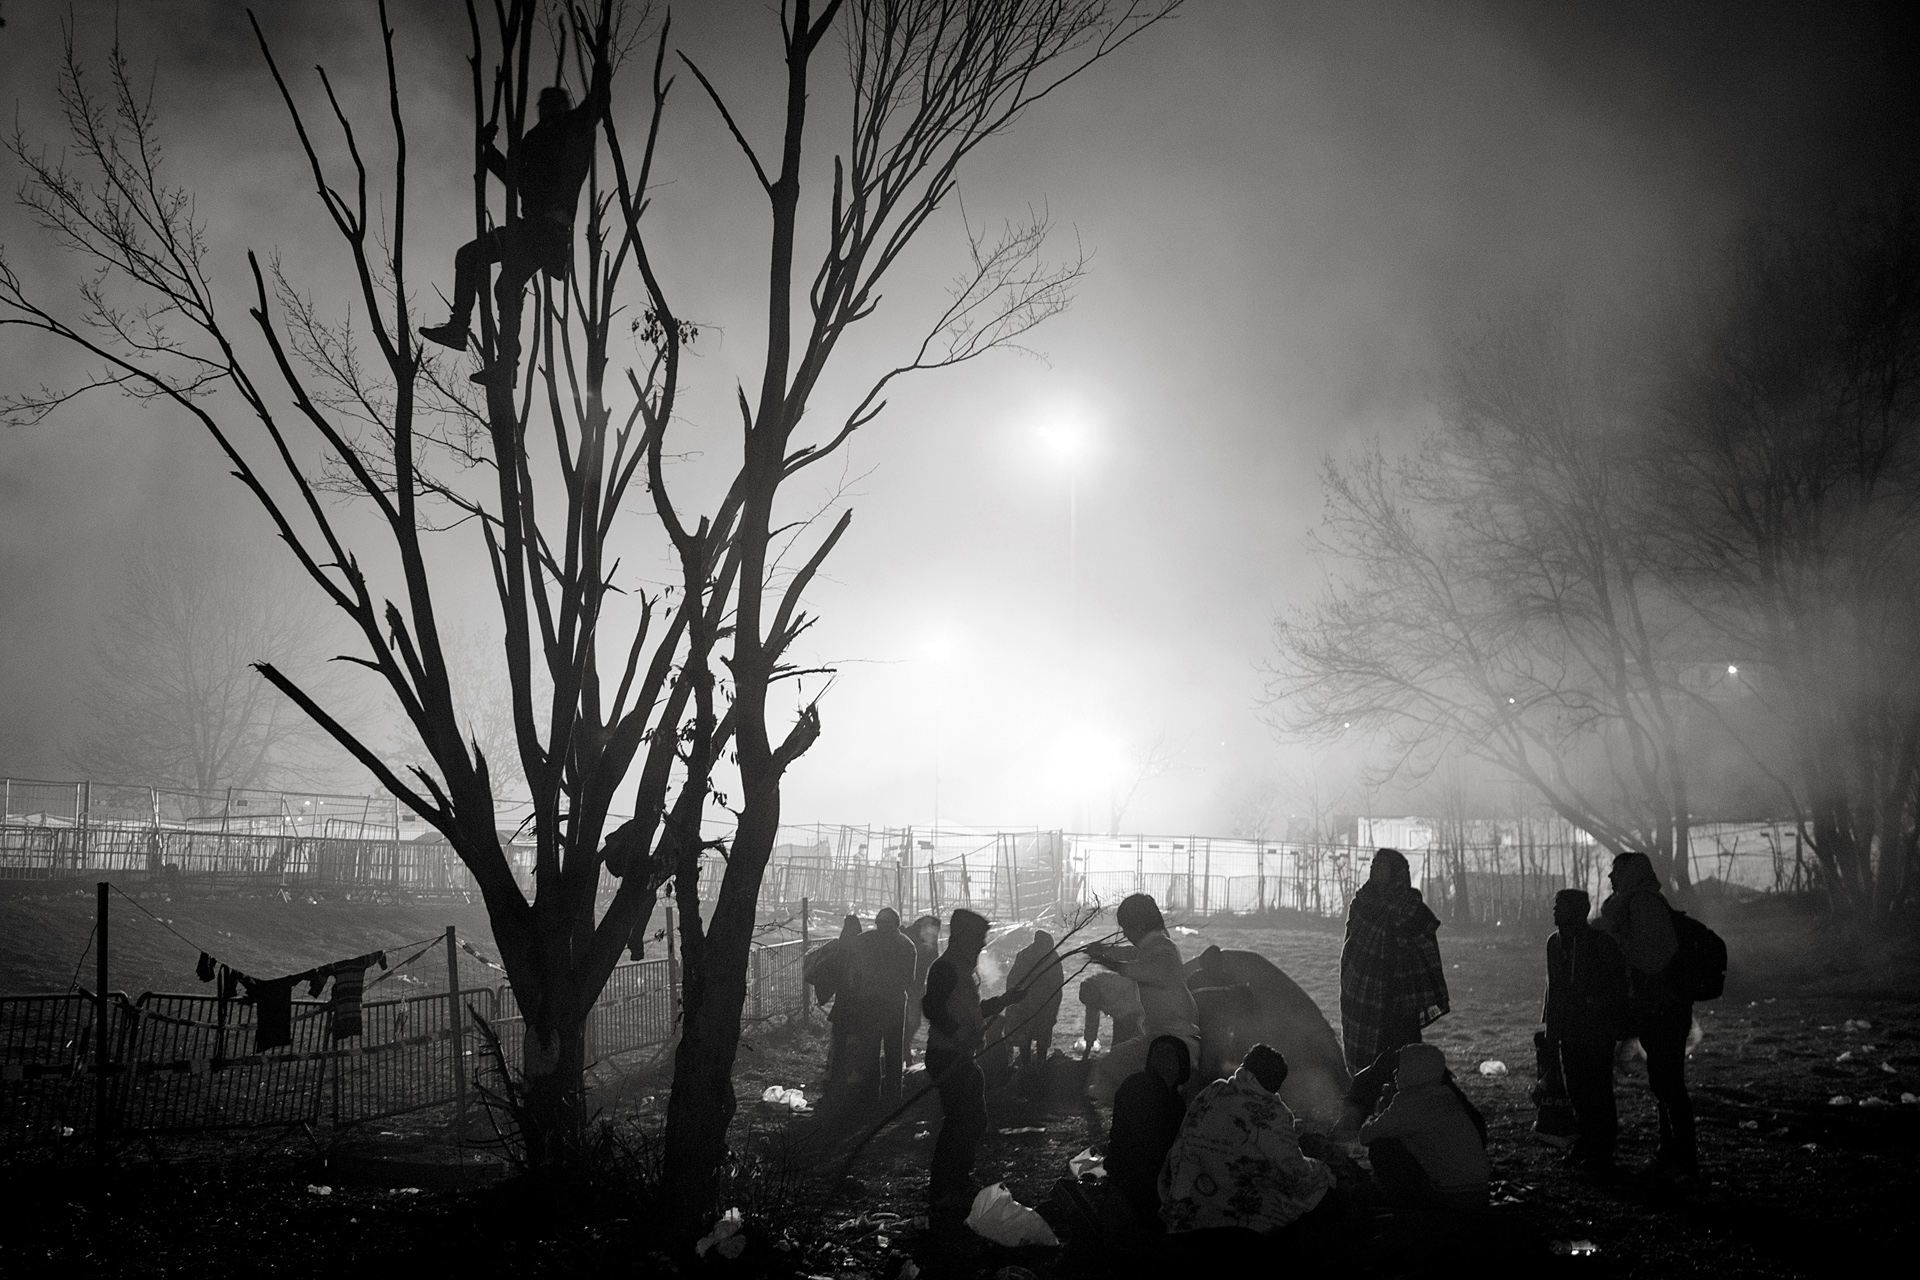 18 November 2015, Sentilj, Slovenia.
Refugees have stranded and to wait in the so-called No-Mans-Land between Slovenia and Austria in order to pass through the bottleneck to Austria.